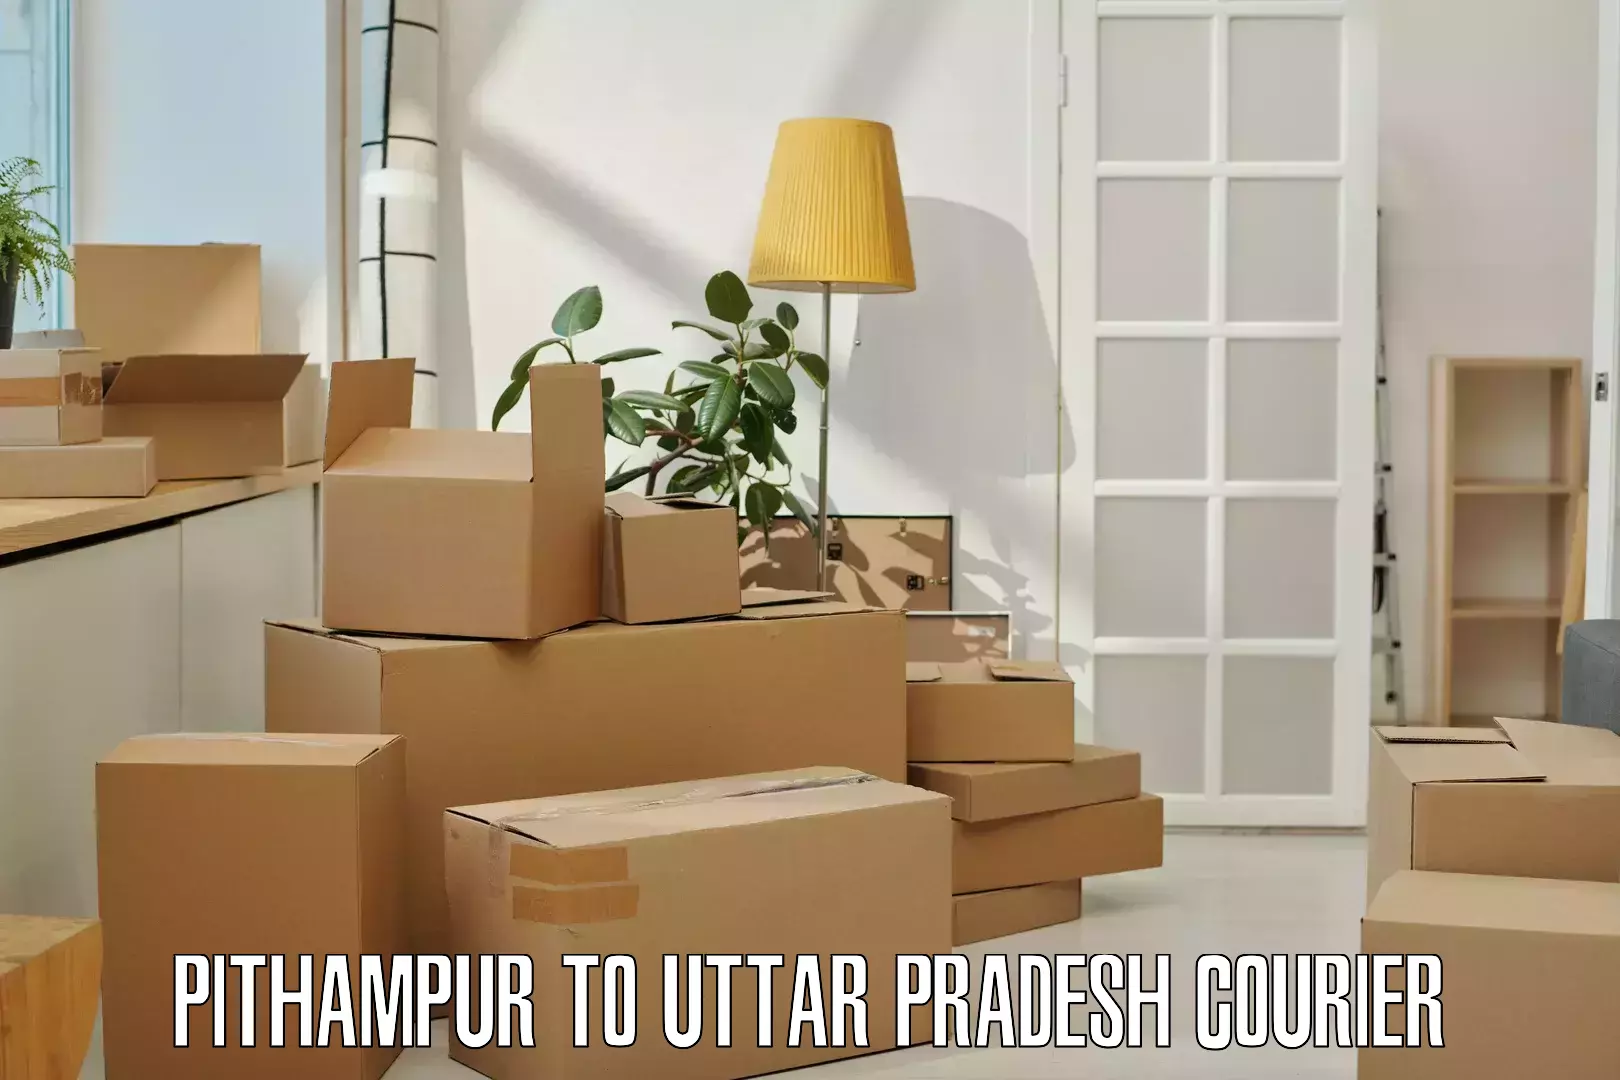 Courier service innovation Pithampur to Behat